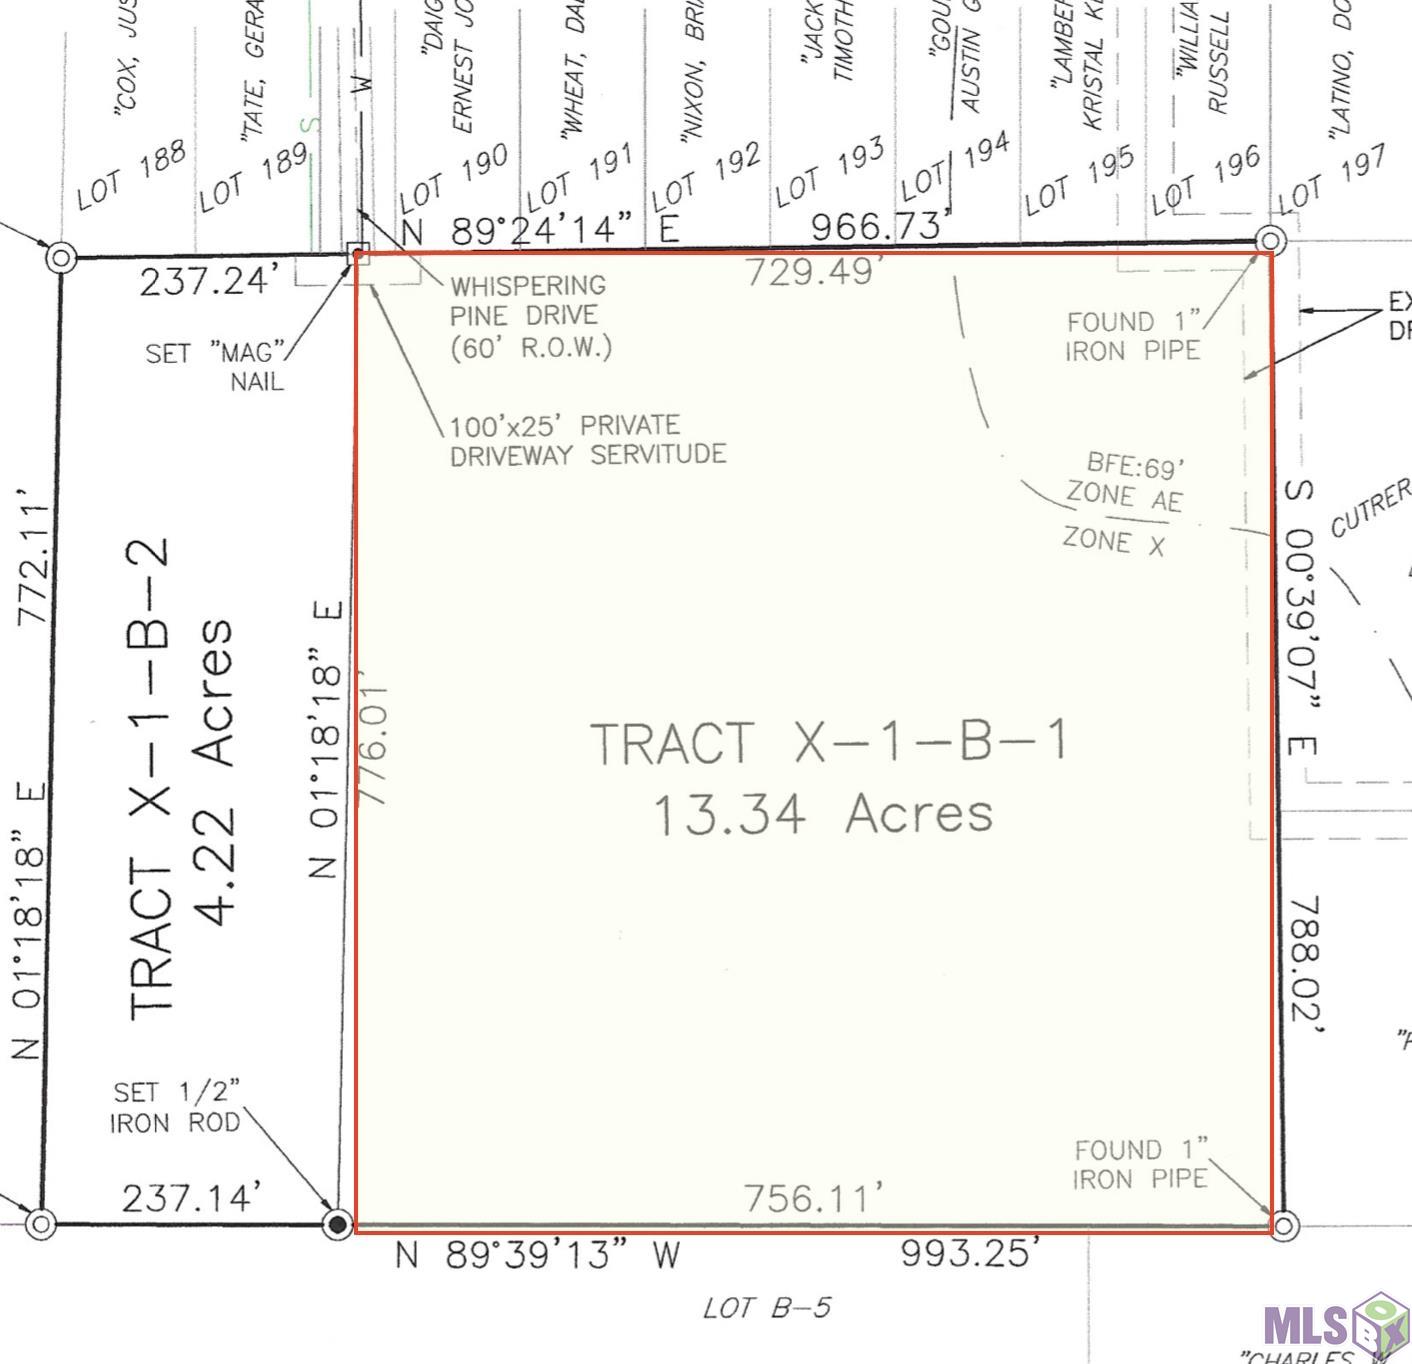 NEW parcel of approximately 13.34 acres located in the back of Indian Mound Subdivision.  Pending drawings and approval for subdividing.